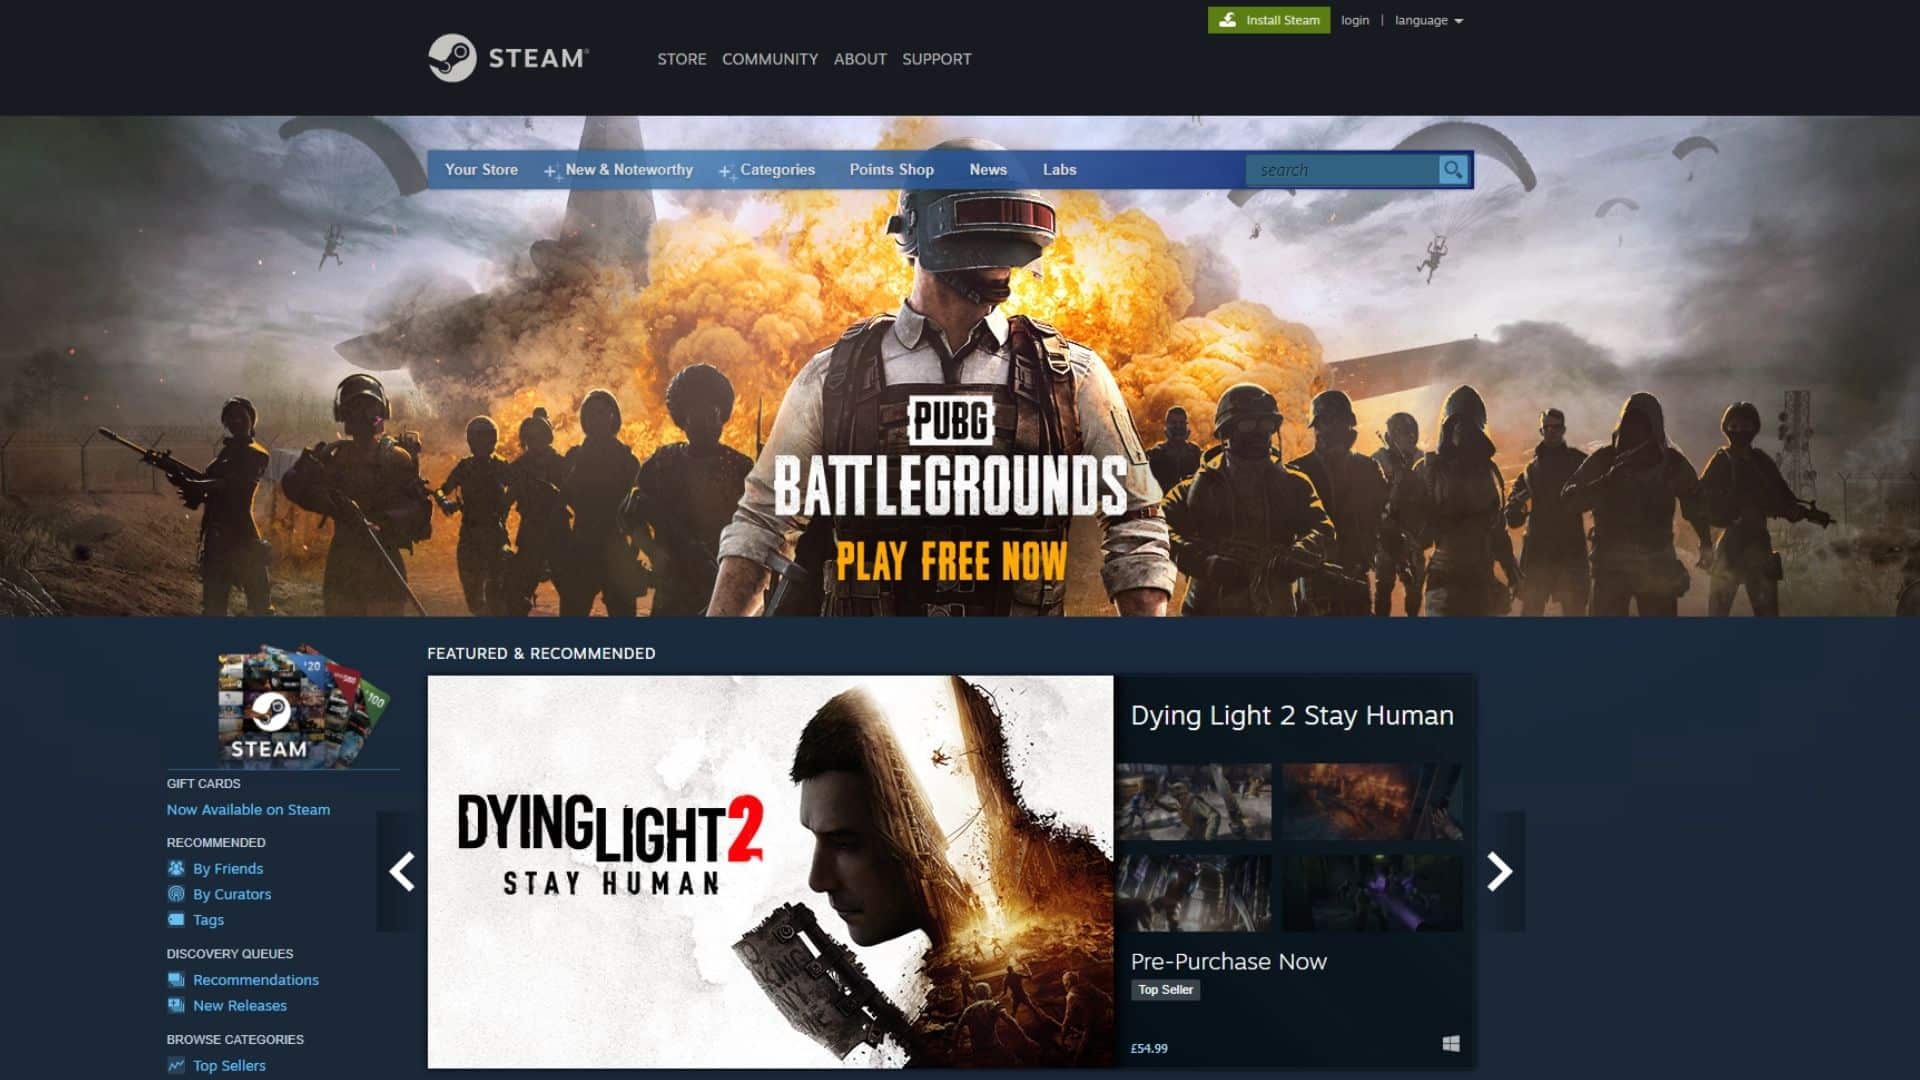 An image of Steam's home page, where players are able to refund a game